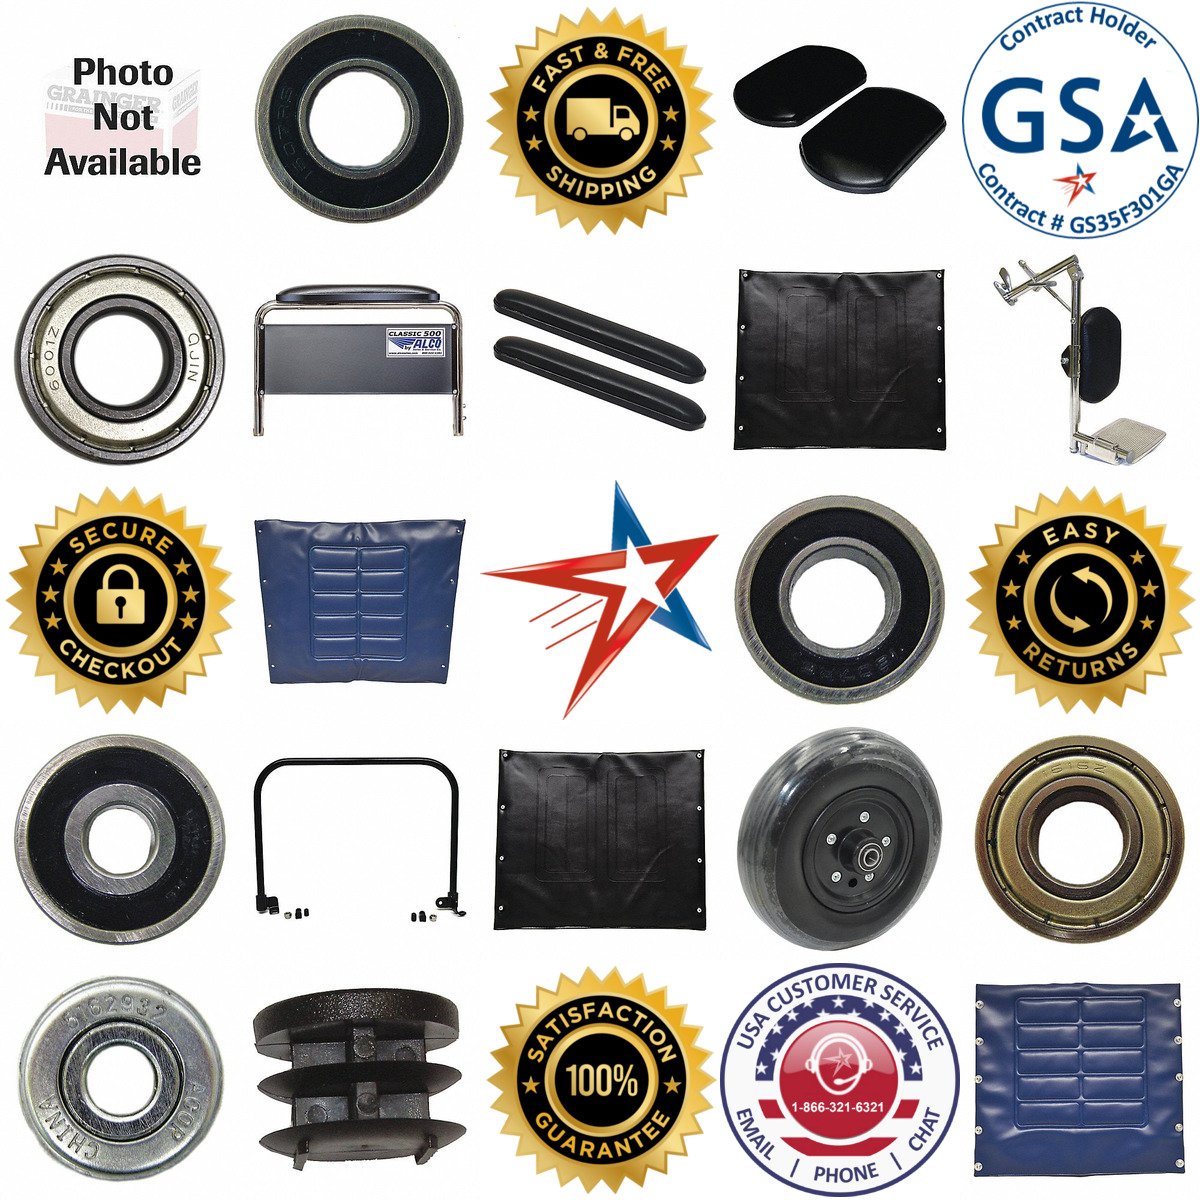 A selection of Wheelchair Parts products on GoVets